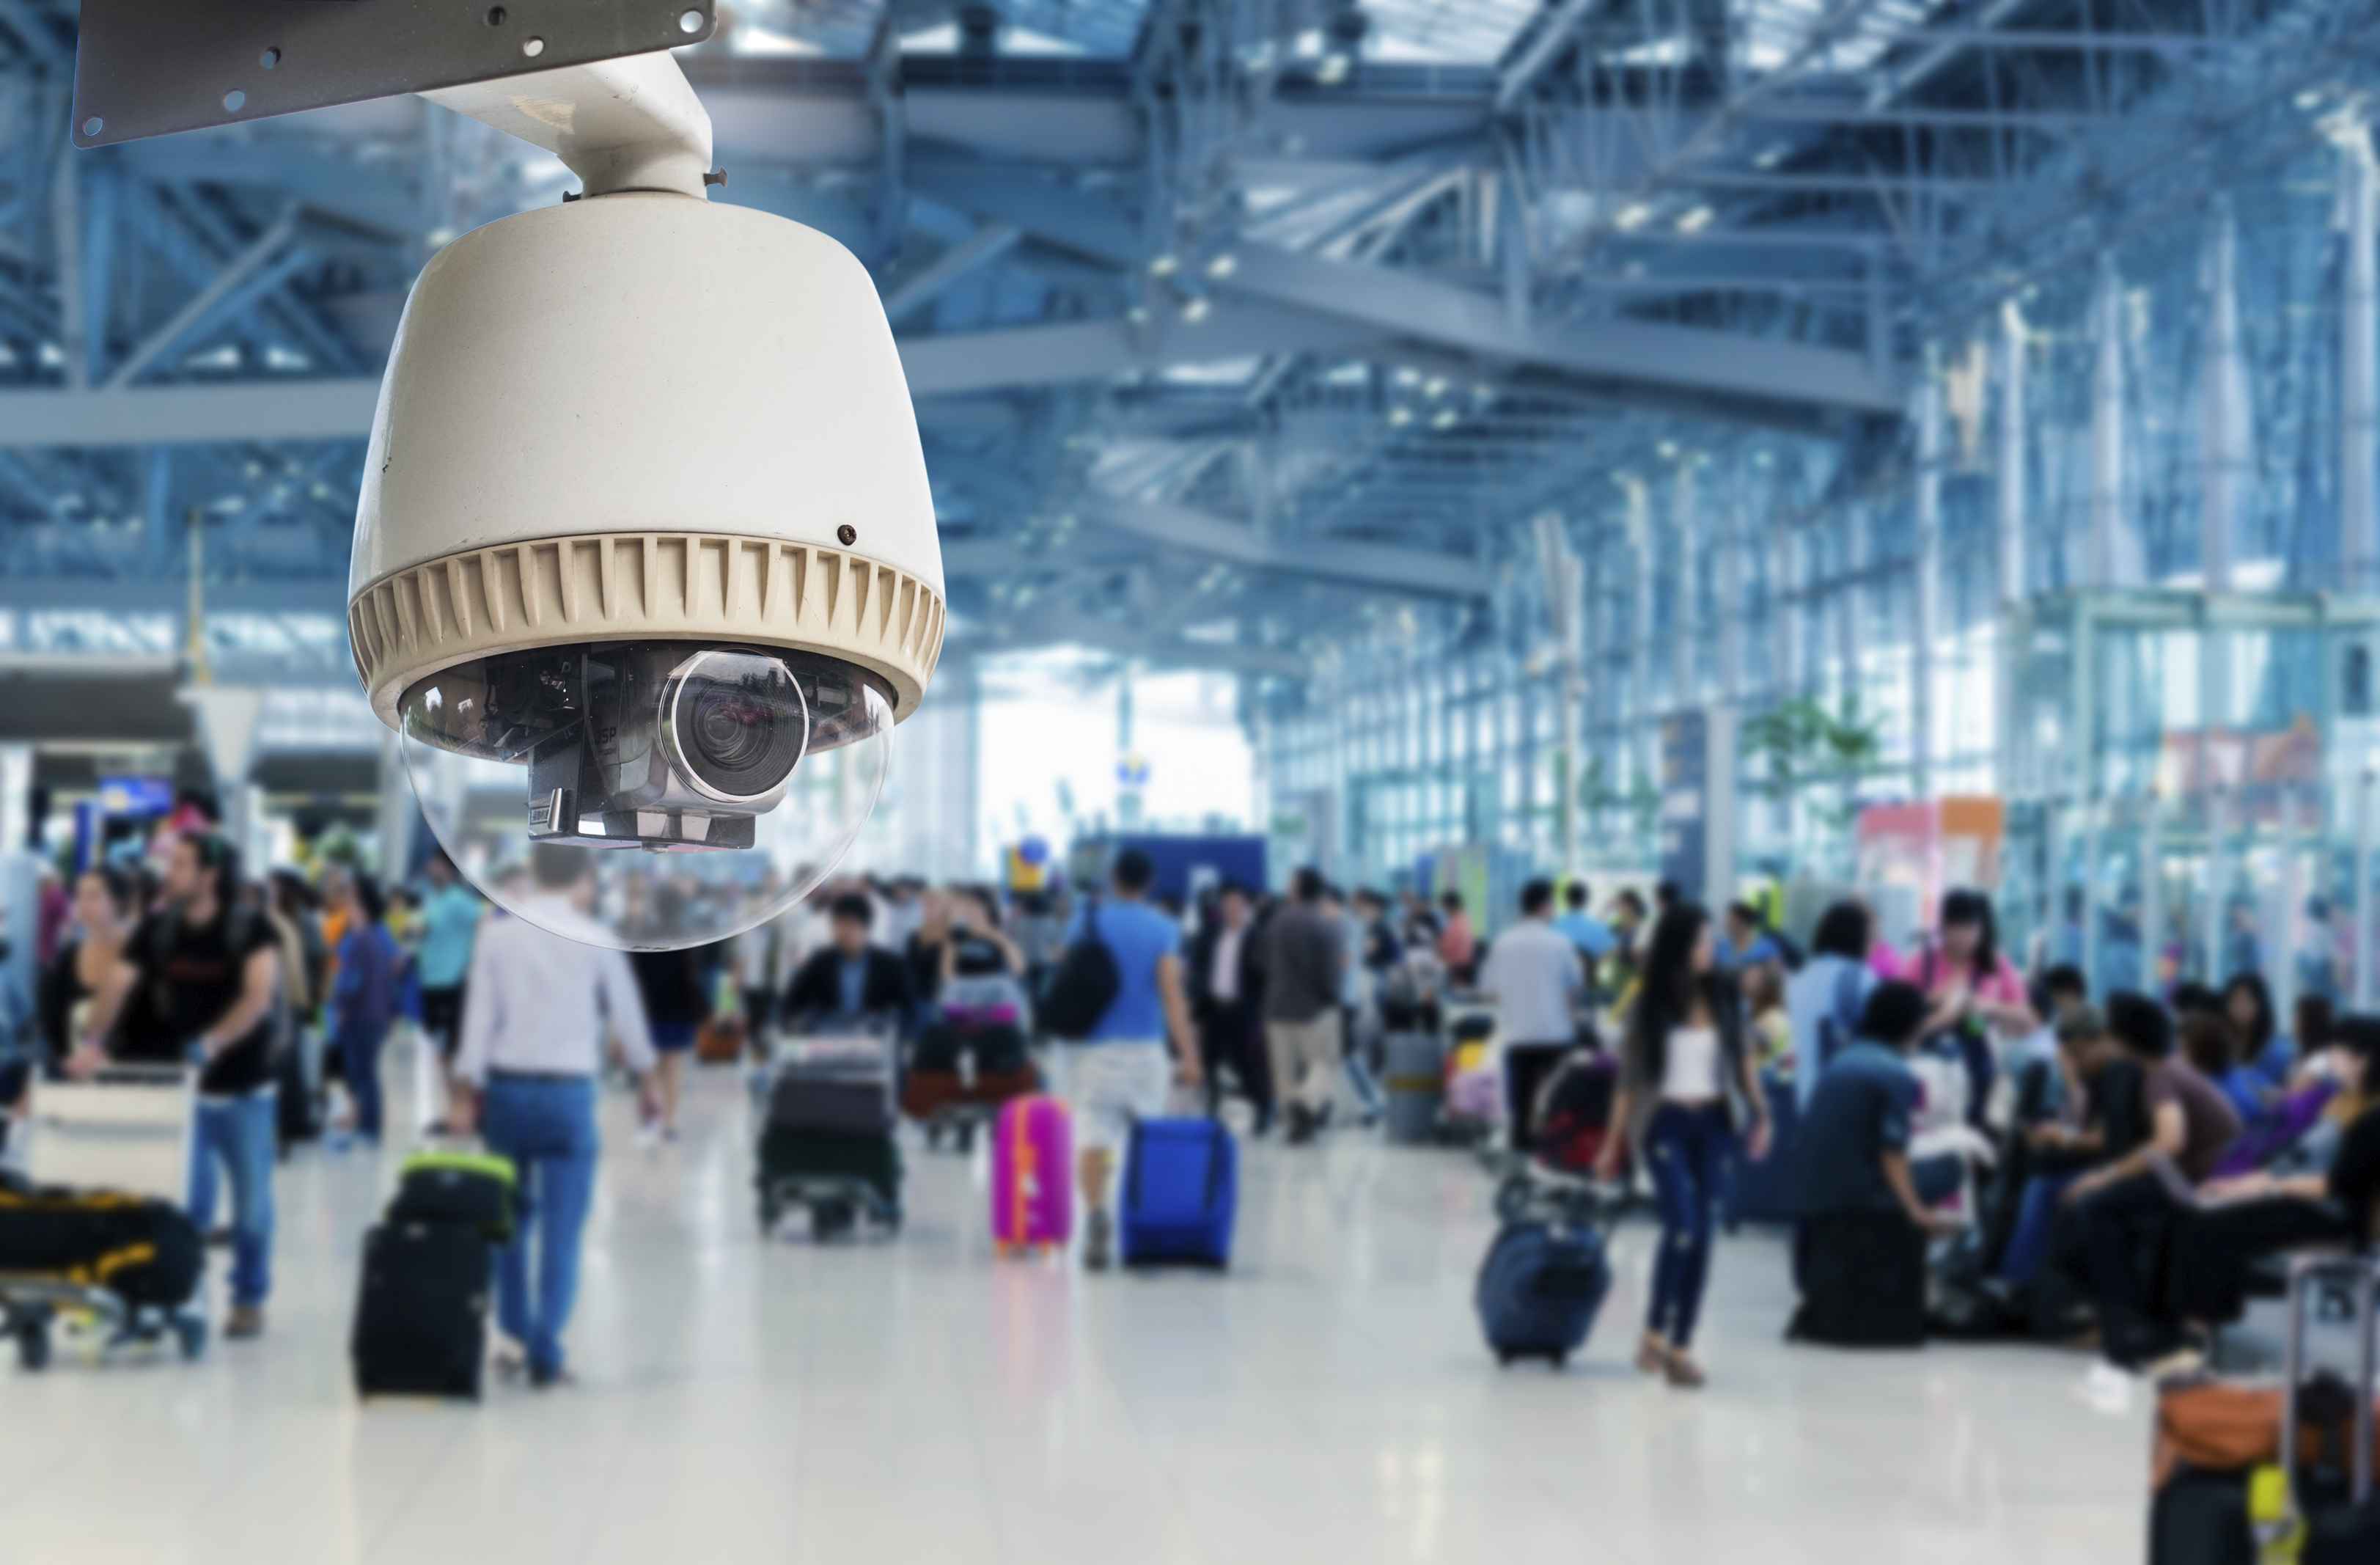 Video surveillance components are critical to ensure secure retention of important data